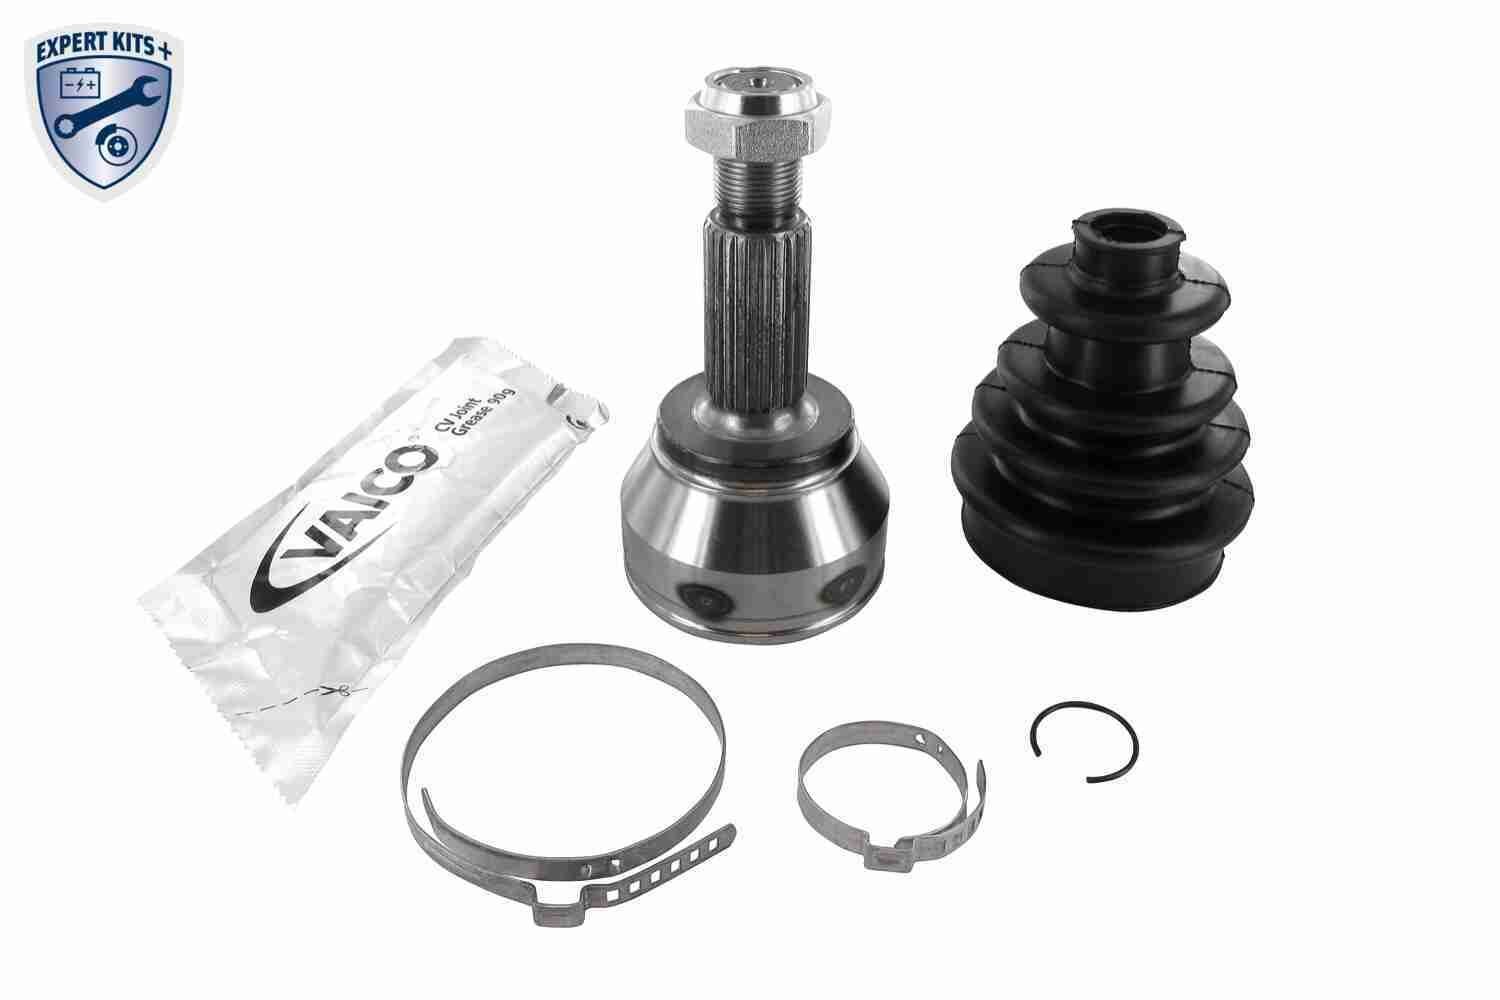 1 493 223 VAICO EXPERT KITS +, Wheel Side, without ABS ring External Toothing wheel side: 25, Internal Toothing wheel side: 22 CV joint V25-0503 buy